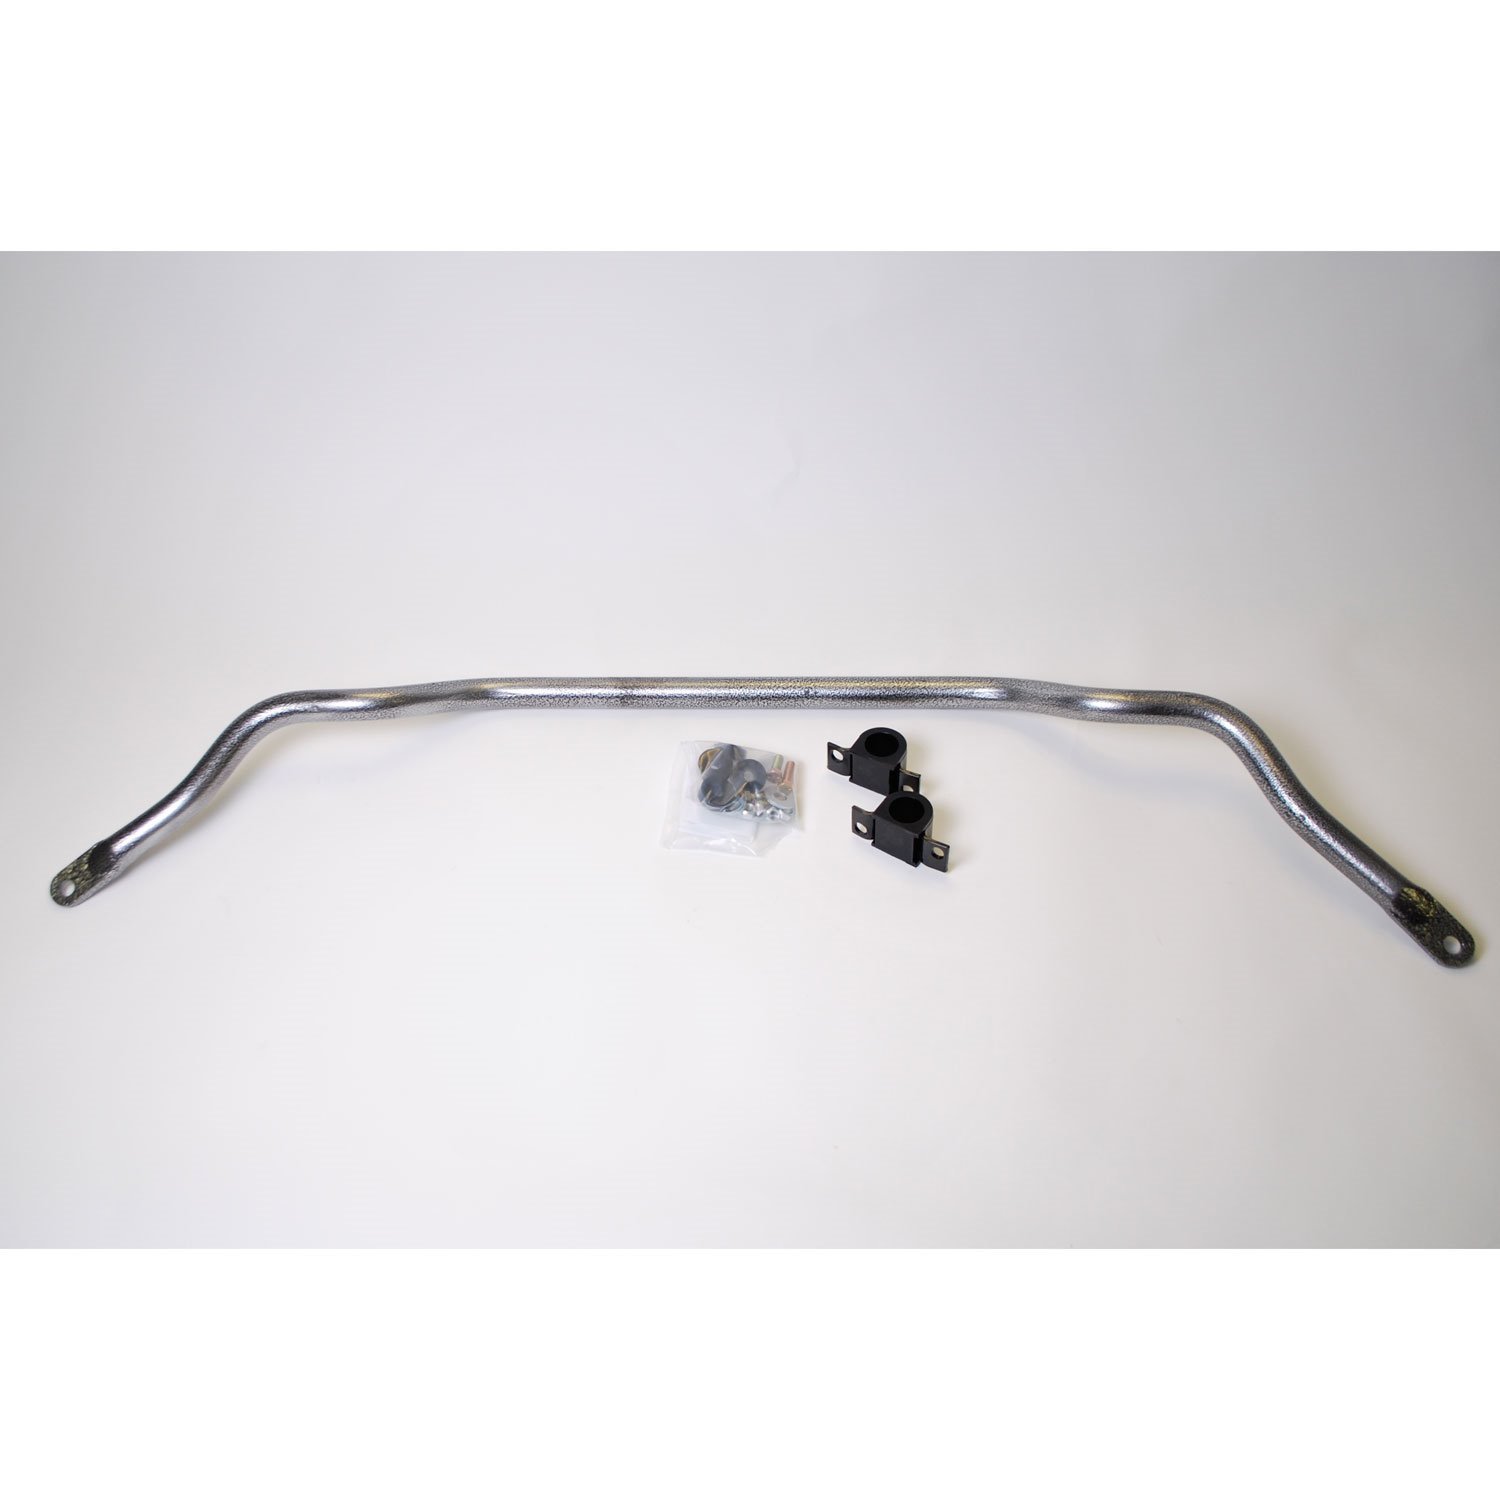 Front Sway Bar for 2000-2006 Toyota Tundra and 2001-2007 Toyota Sequoia